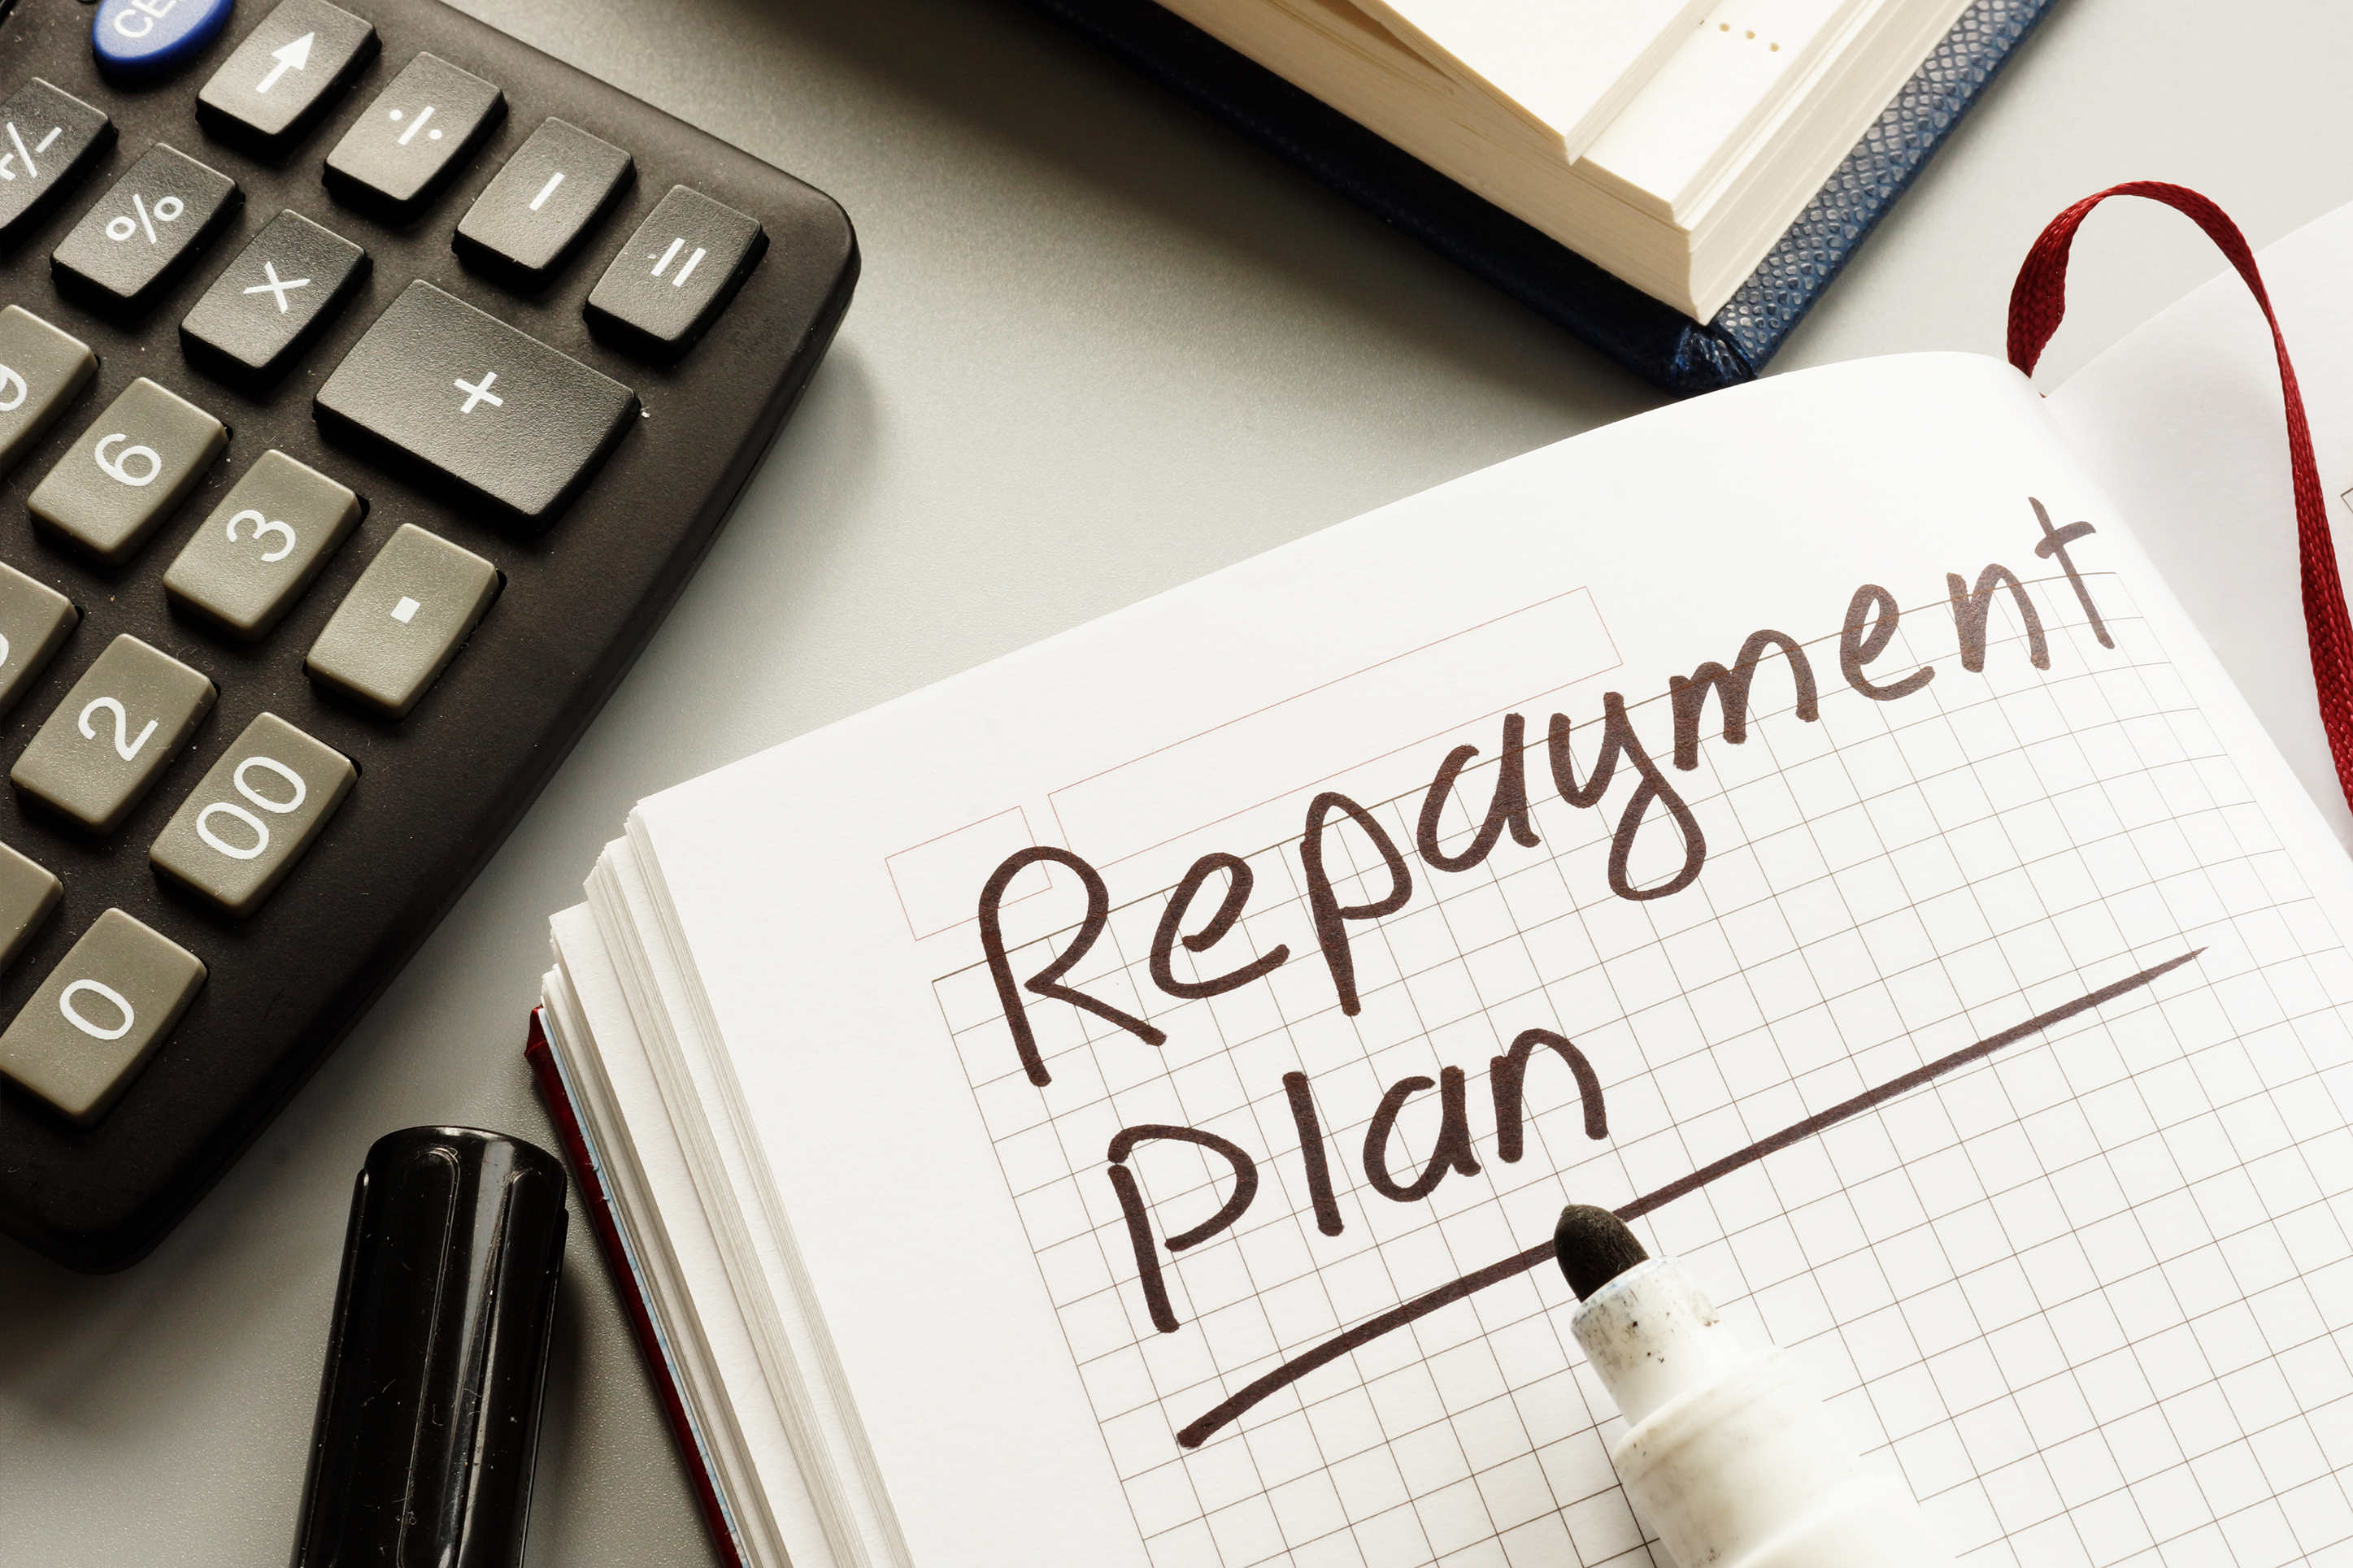 Image of a repayment plan.